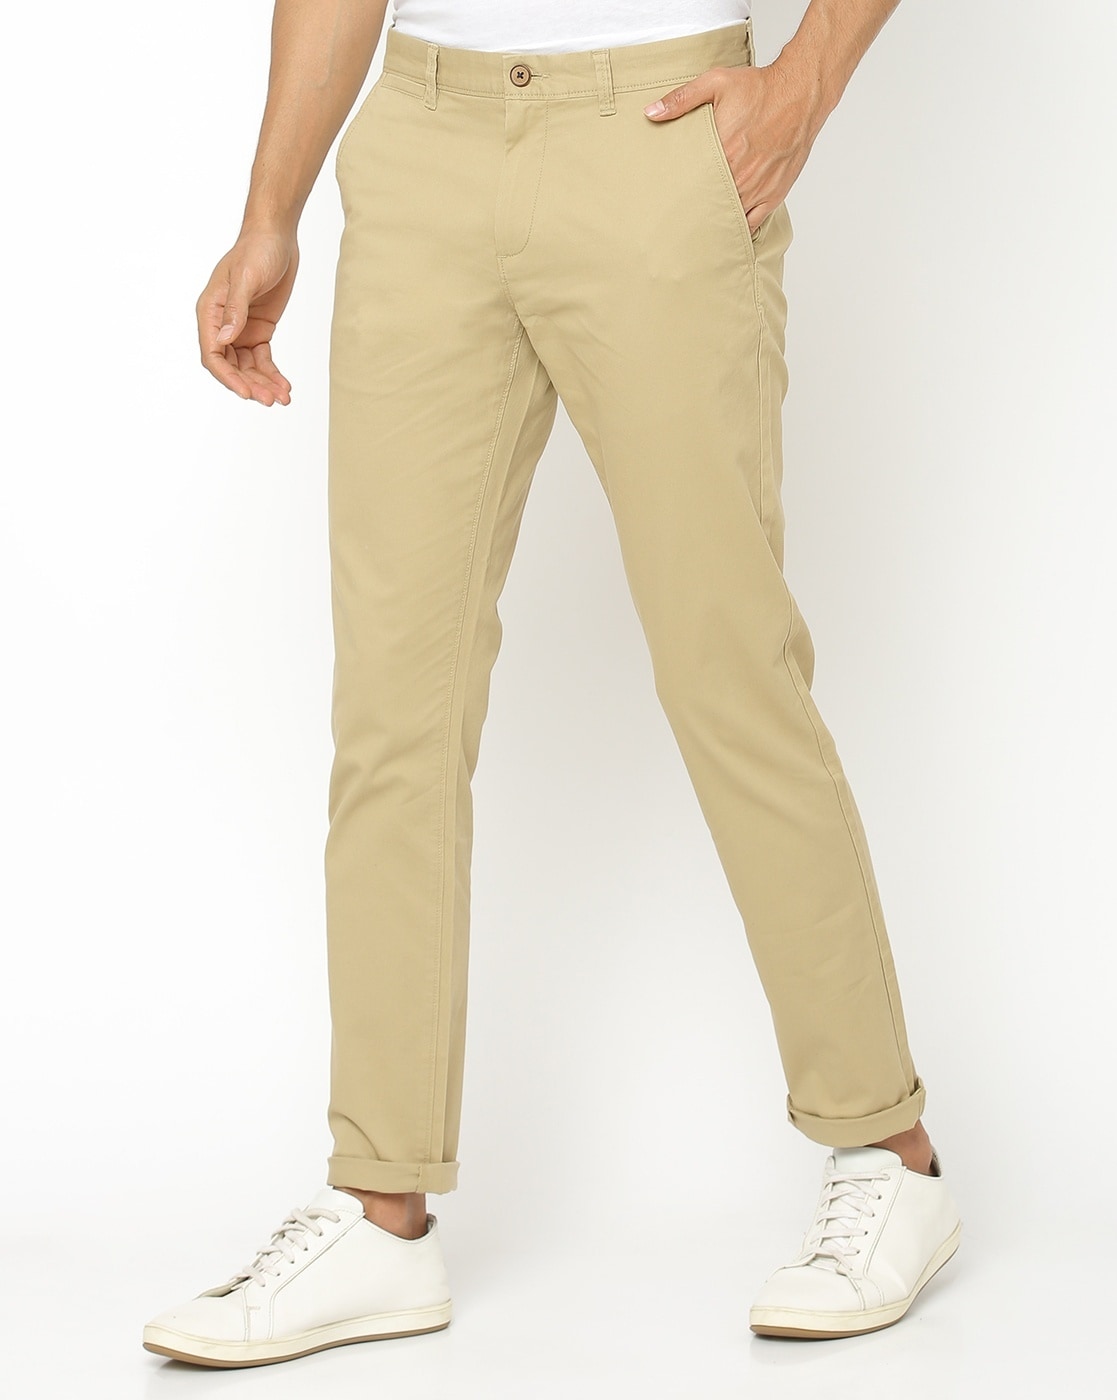 United colors of benetton low rise trousers  Buy United colors of benetton  low rise trousers online in India